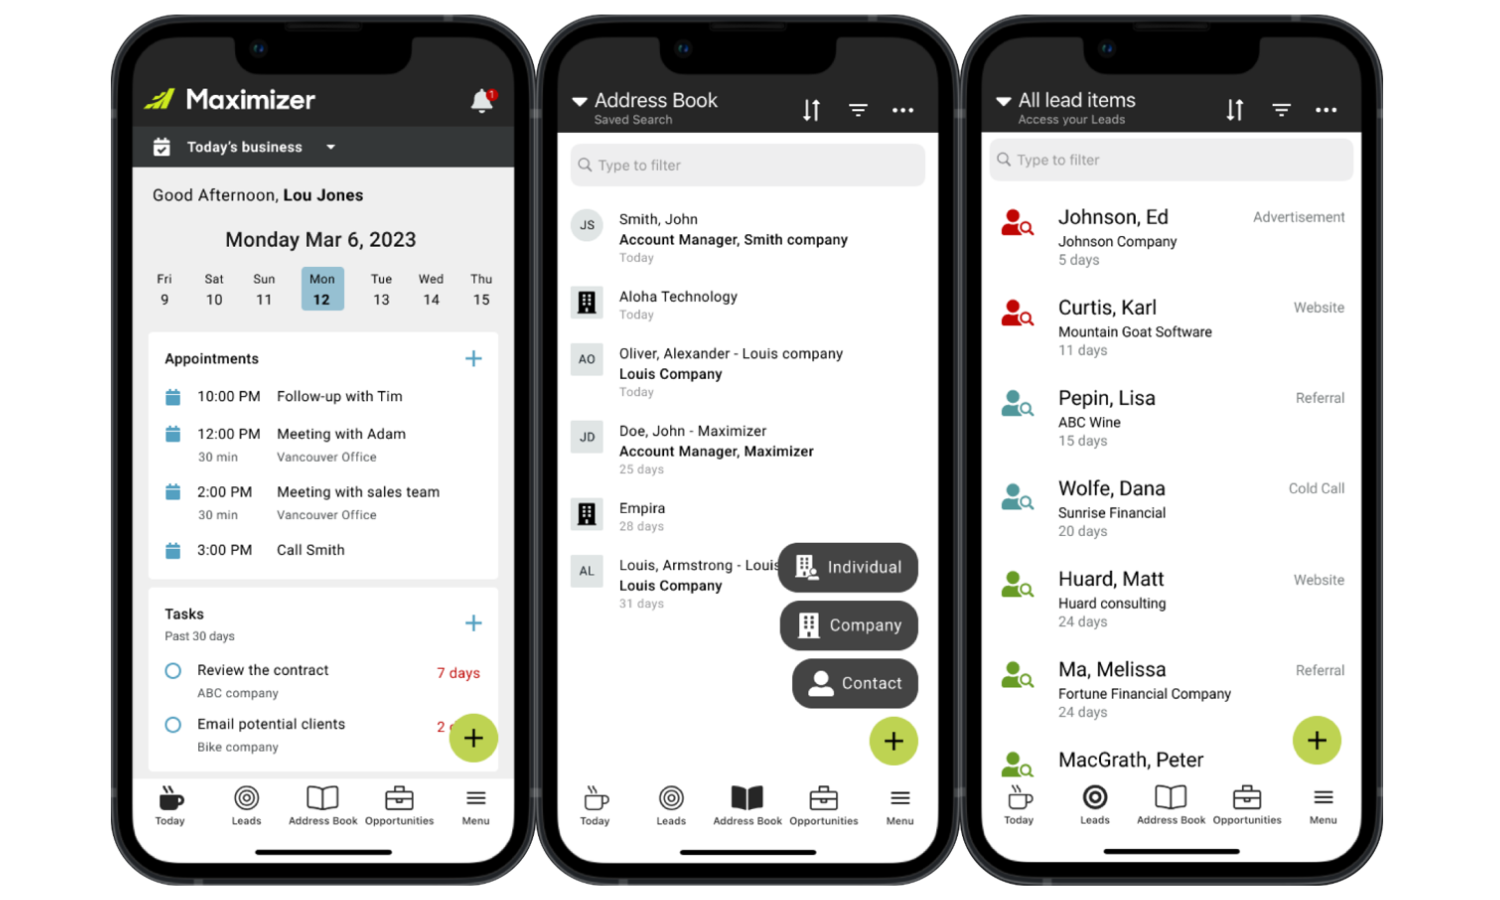 Maximizer CRM Software - Our feature-rich mobile app allows you to manage your schedule, update your pipeline, and connect with customers while on the go!